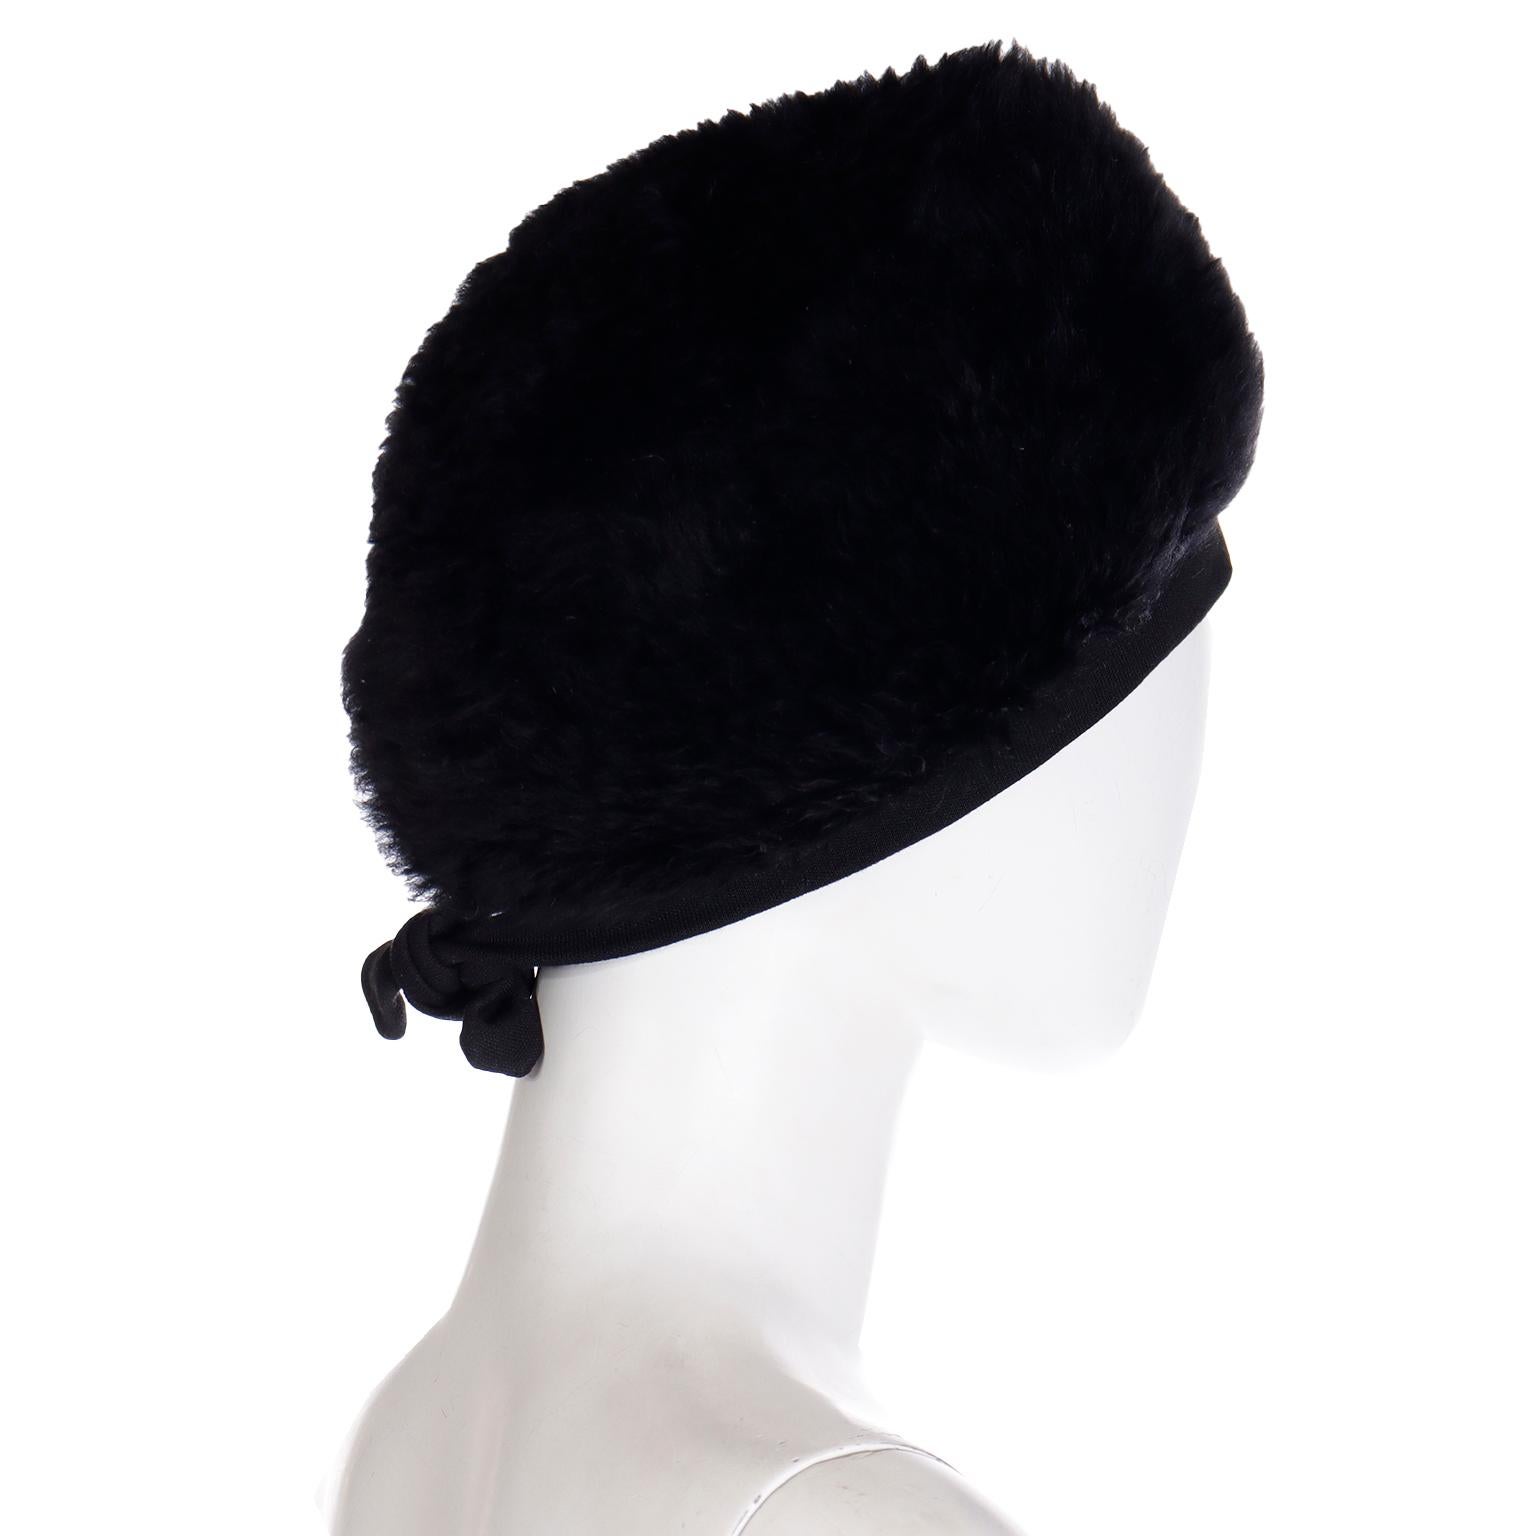 Yves Saint Laurent 1970s Russian inspired Vintage Black Fur Hat In Good Condition For Sale In Portland, OR